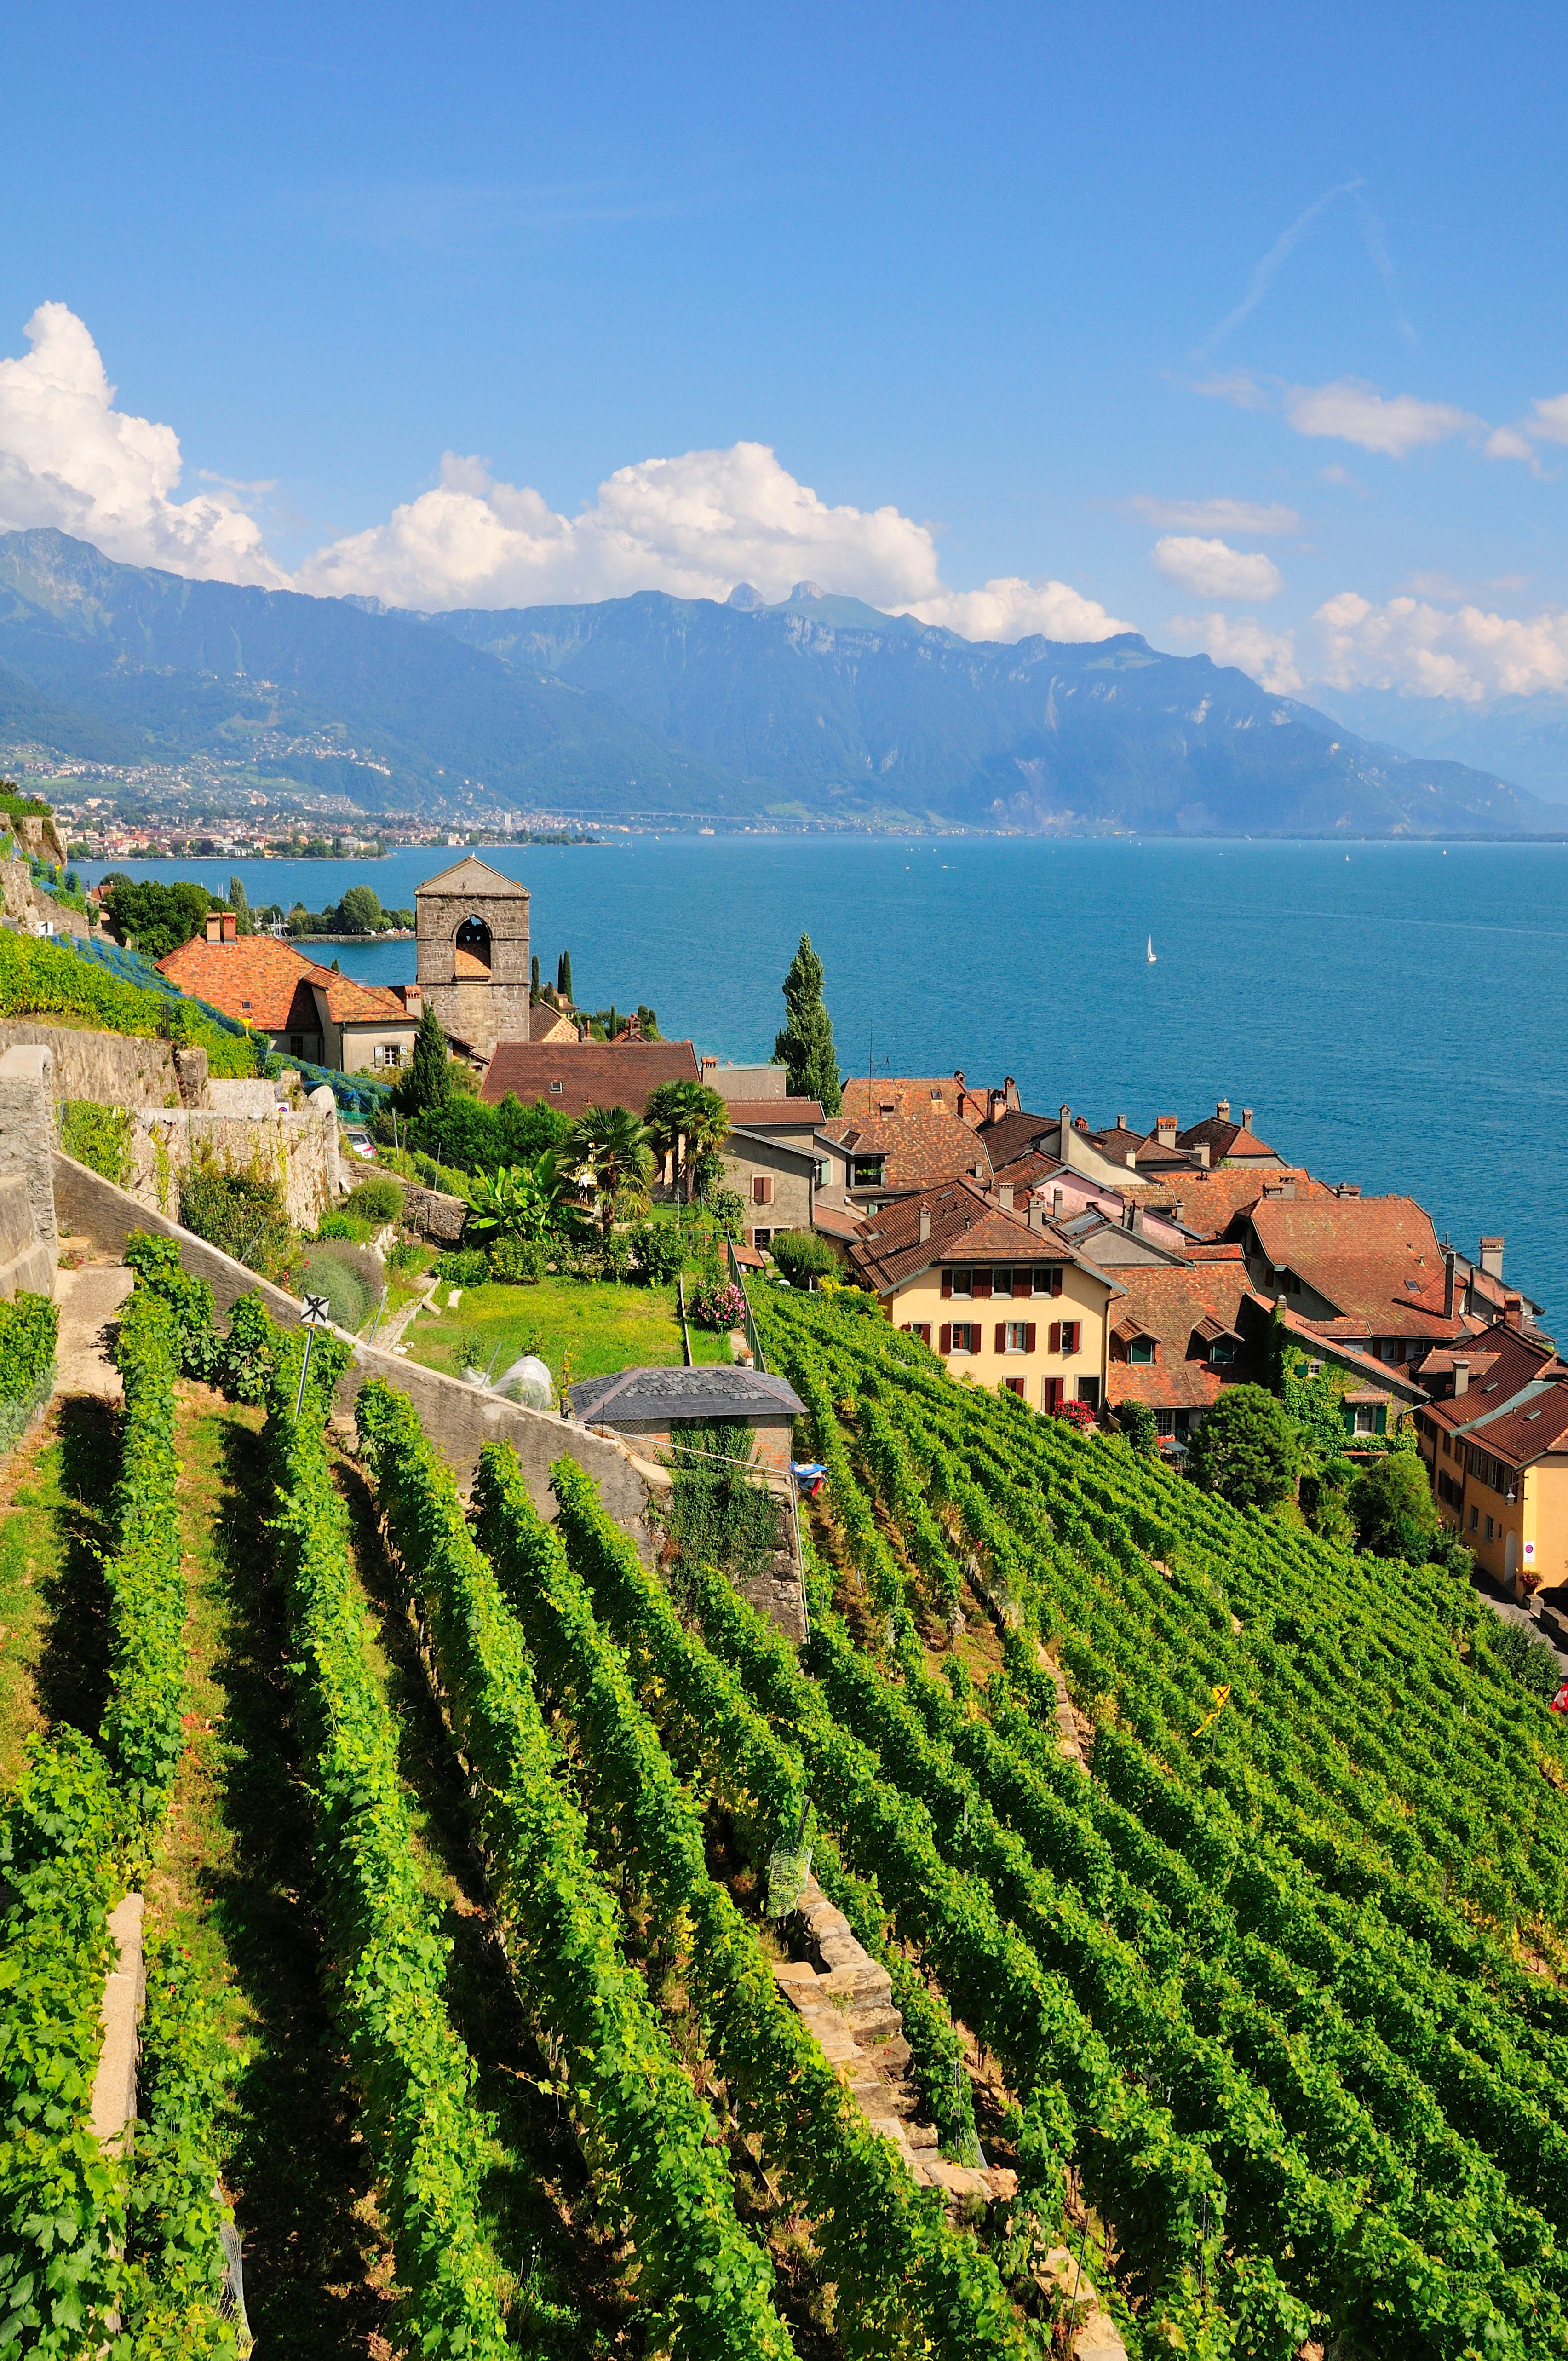 Lausanne is home to Unesco heritage listed vineyards